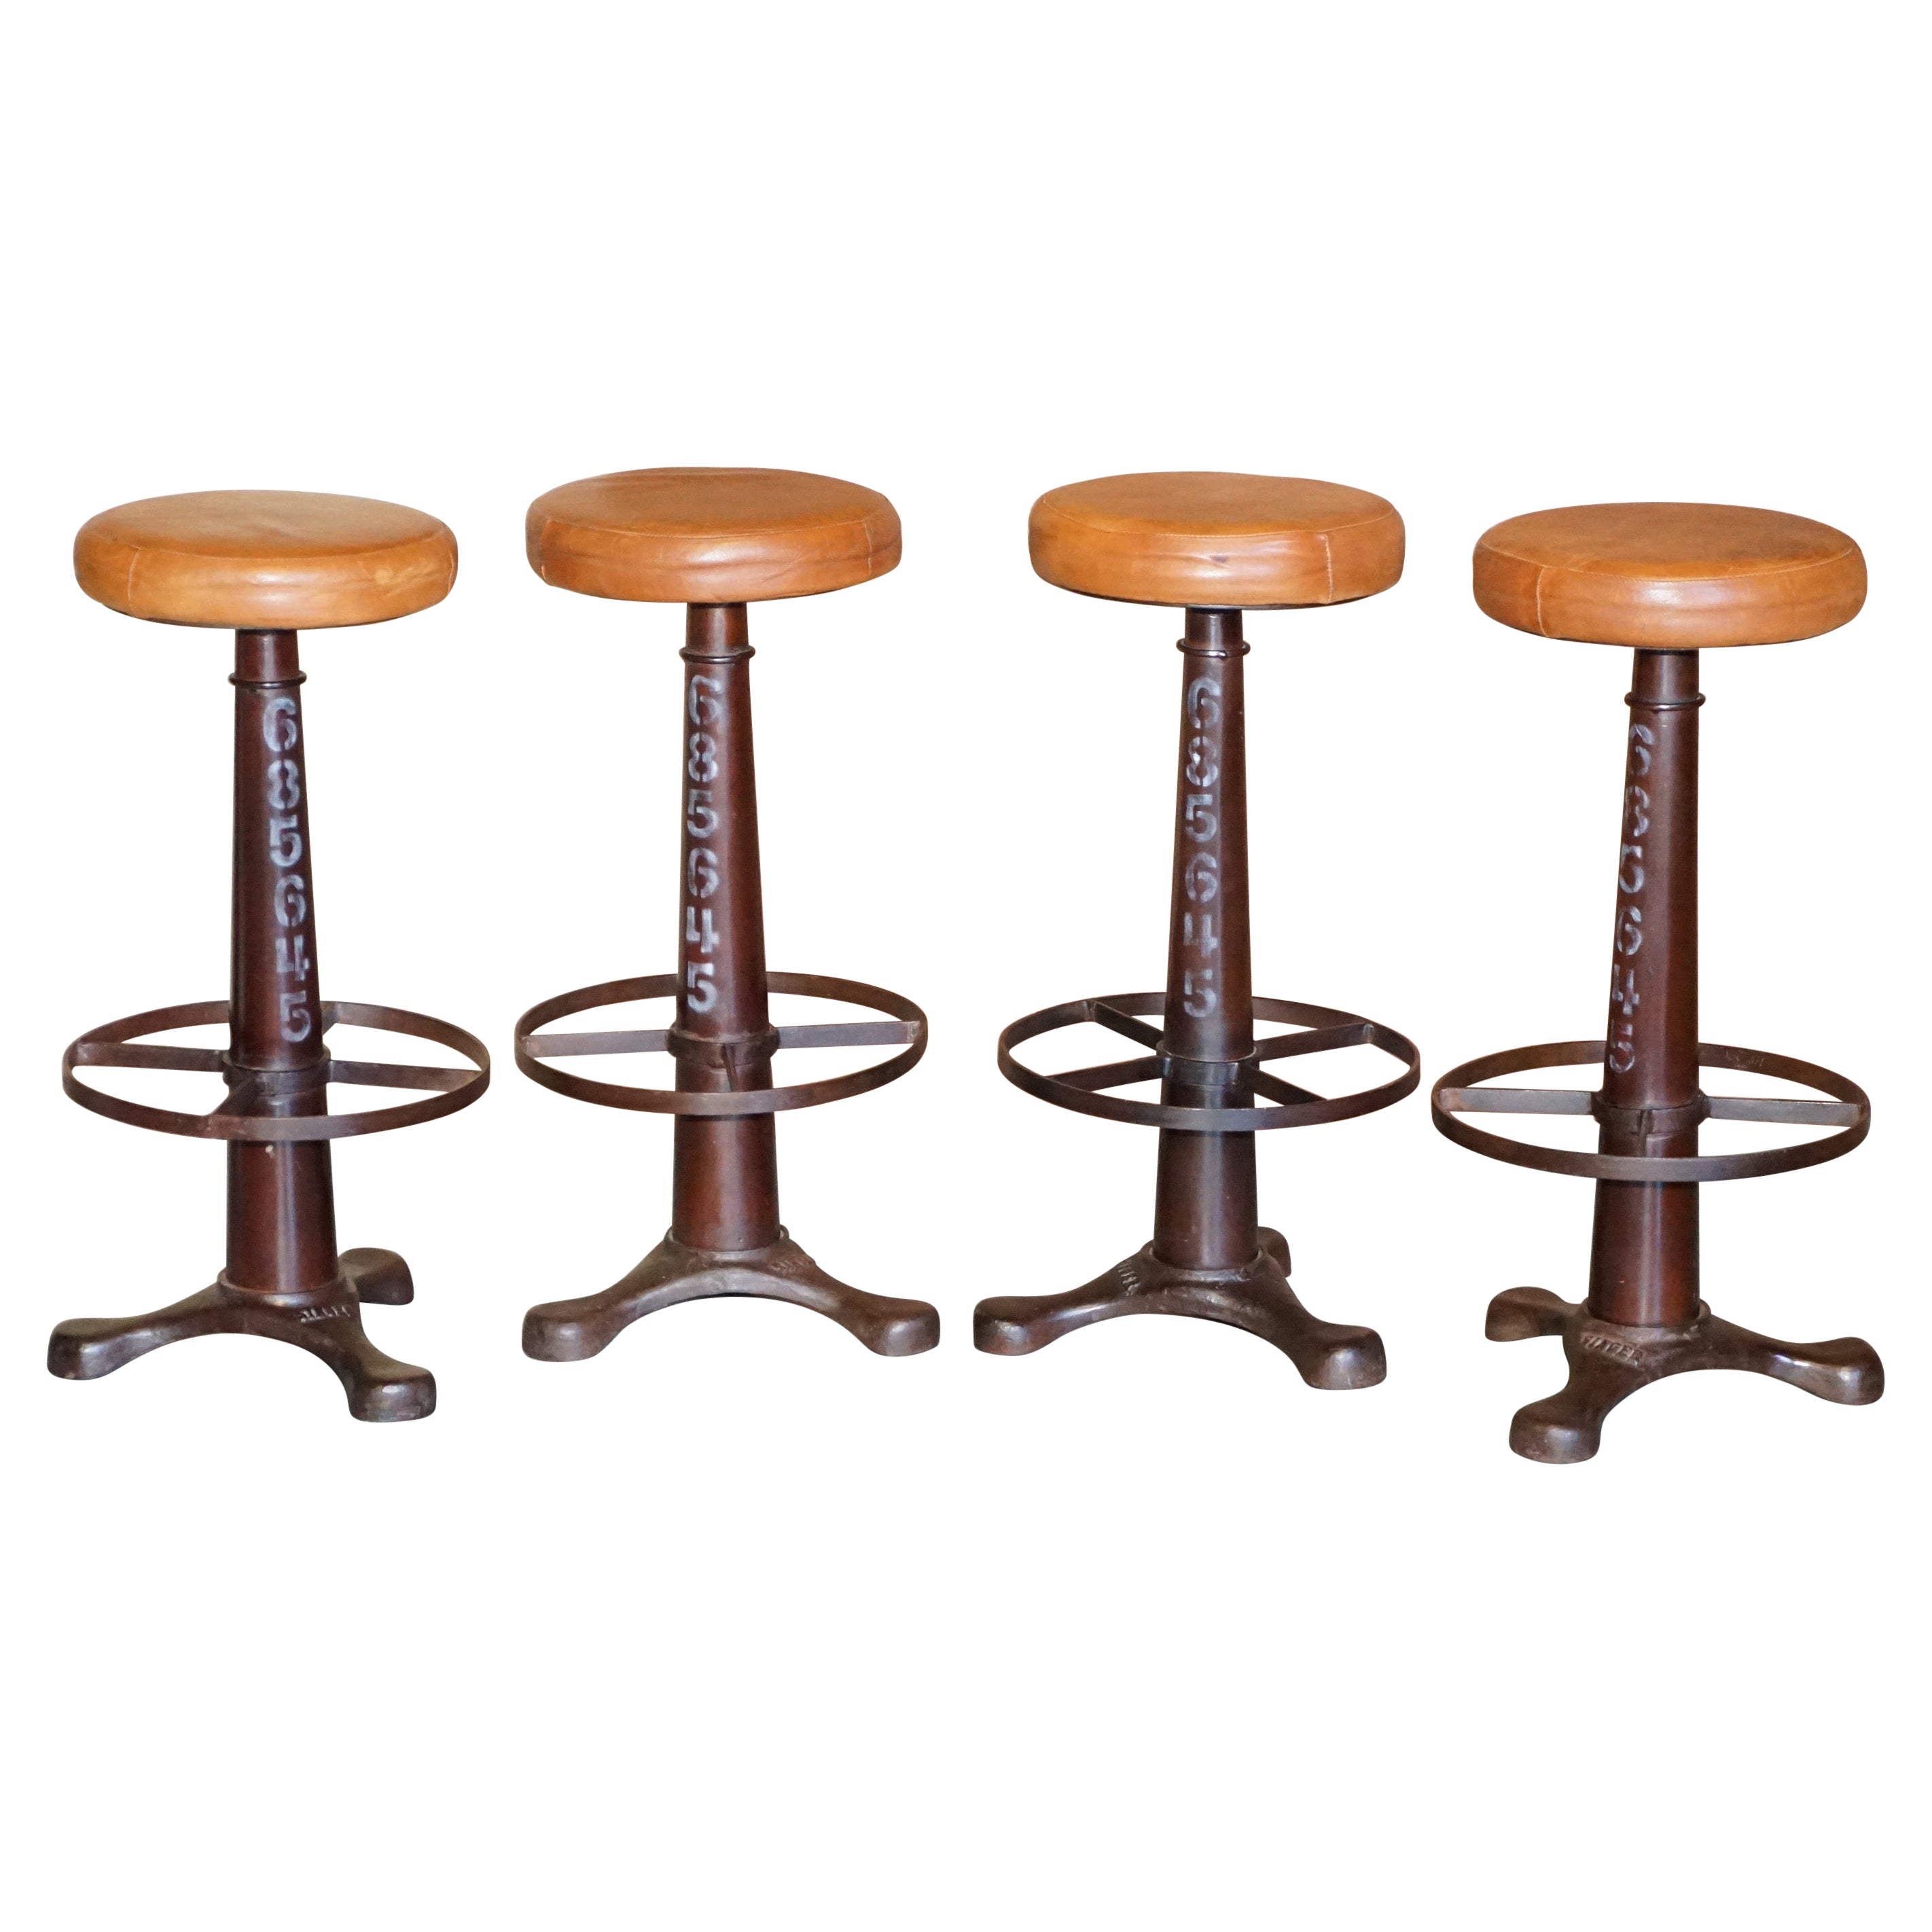 Suite of Four Cast Iron Vintage Singer Bar Stools Brown Leather Seat Pads 4